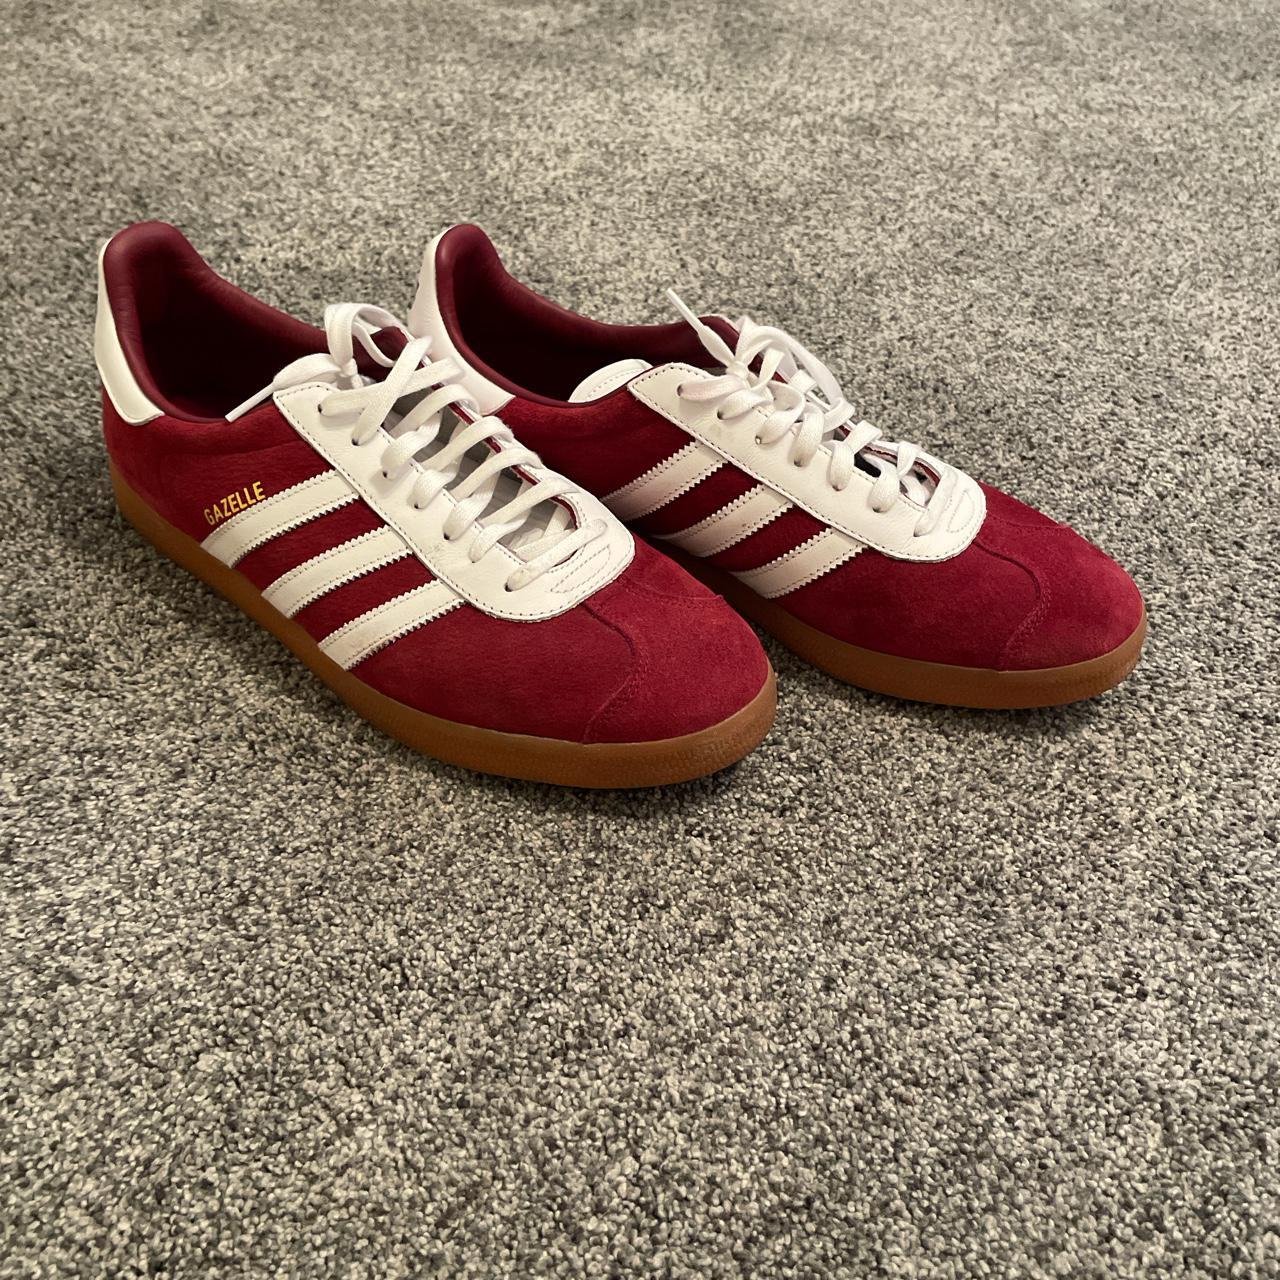 Adidas Men's Burgundy and Red Trainers